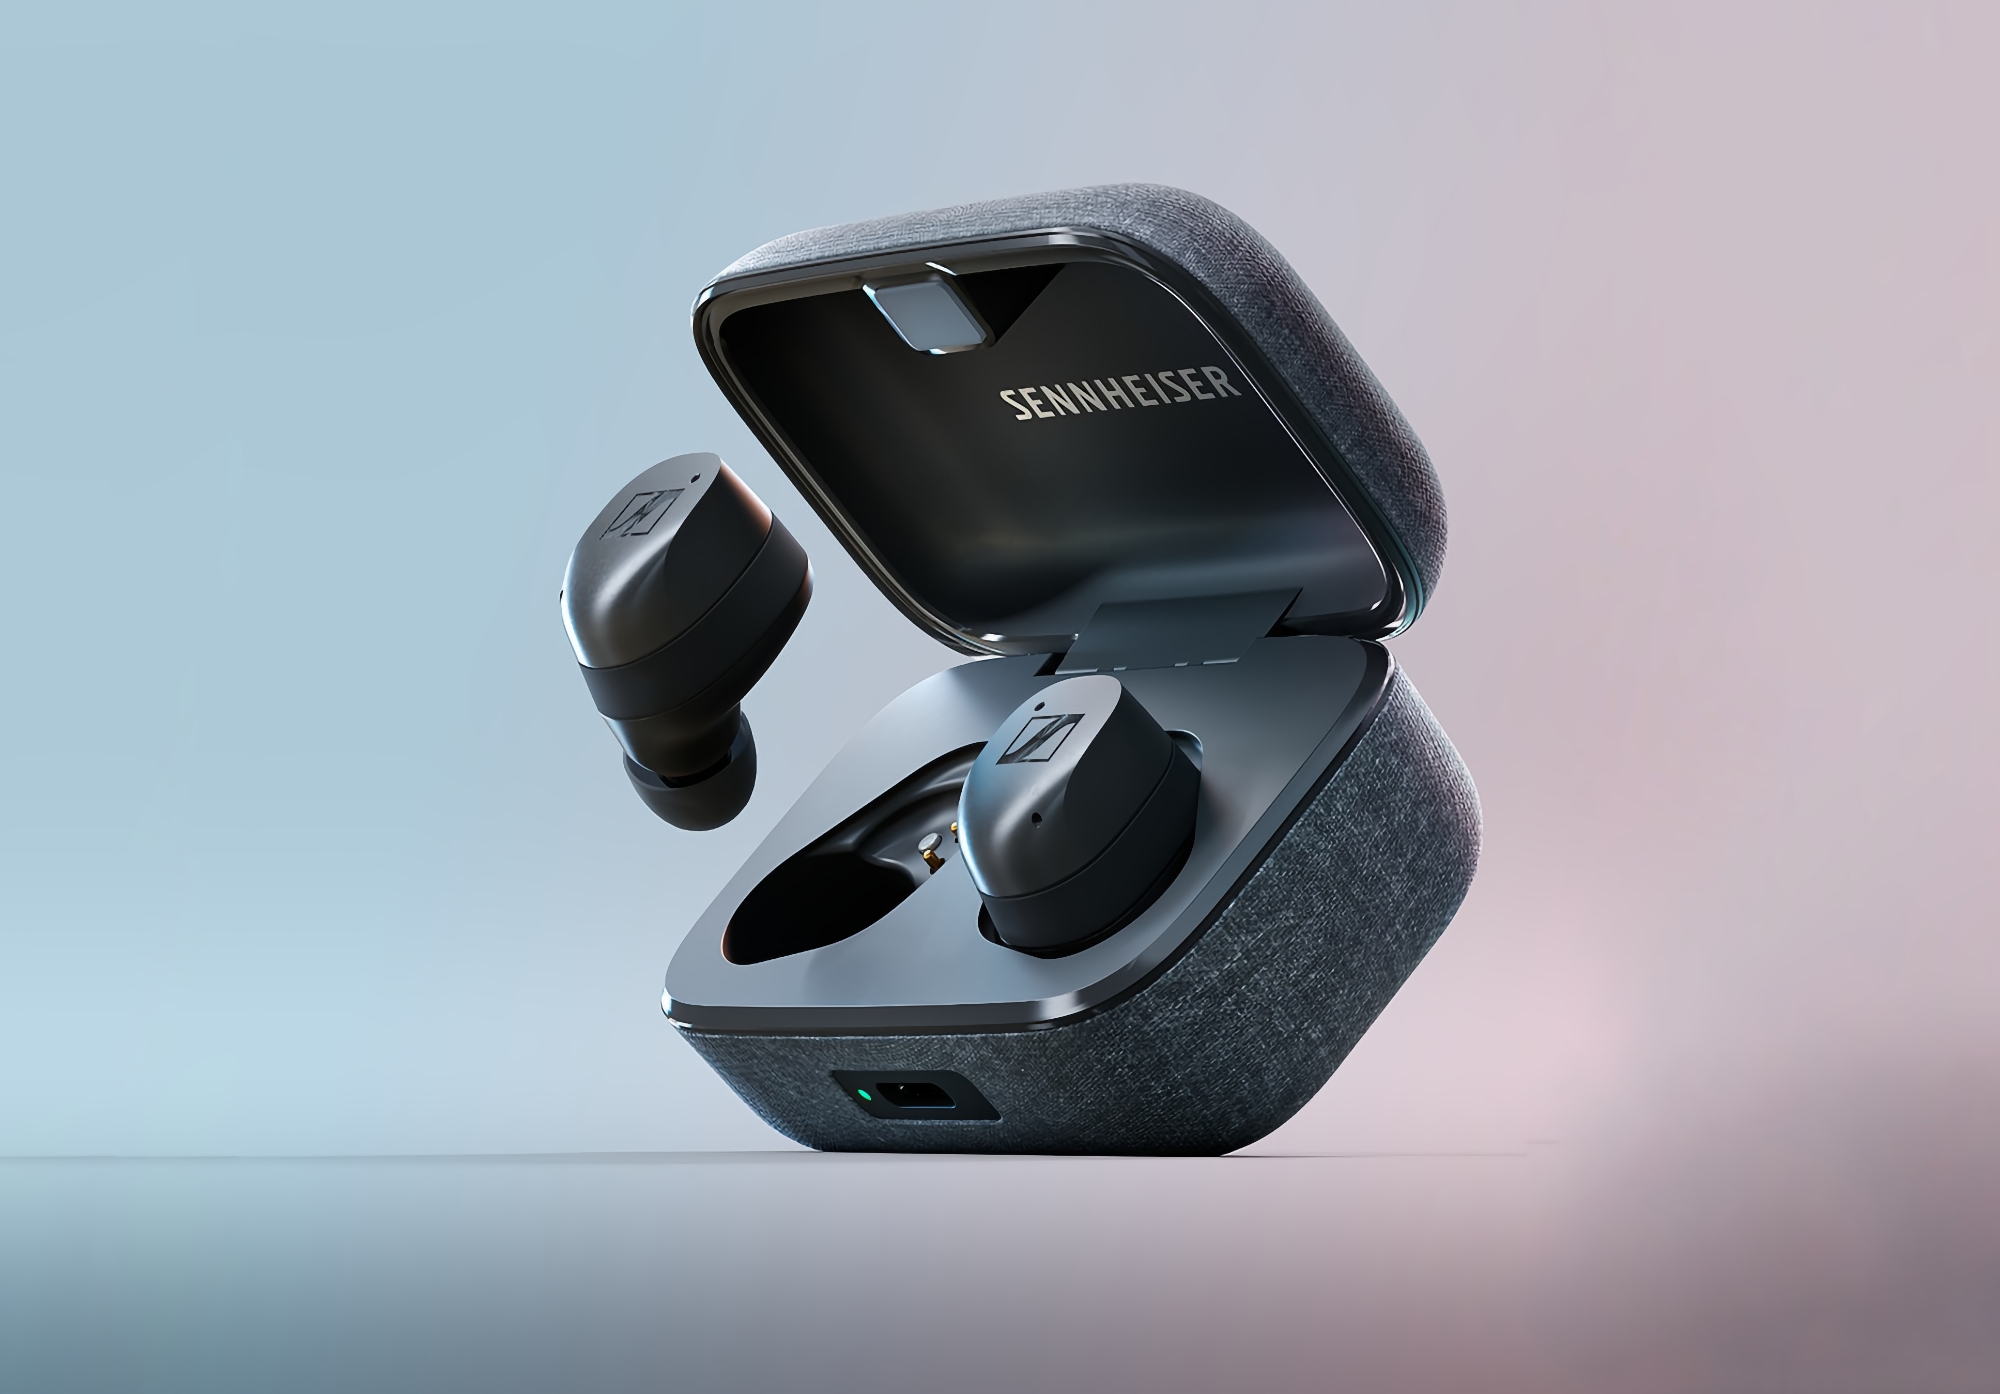 Sennheiser MOMENTUM True Wireless 3: ANC, IPX4 protection and autonomy up to 28 hours